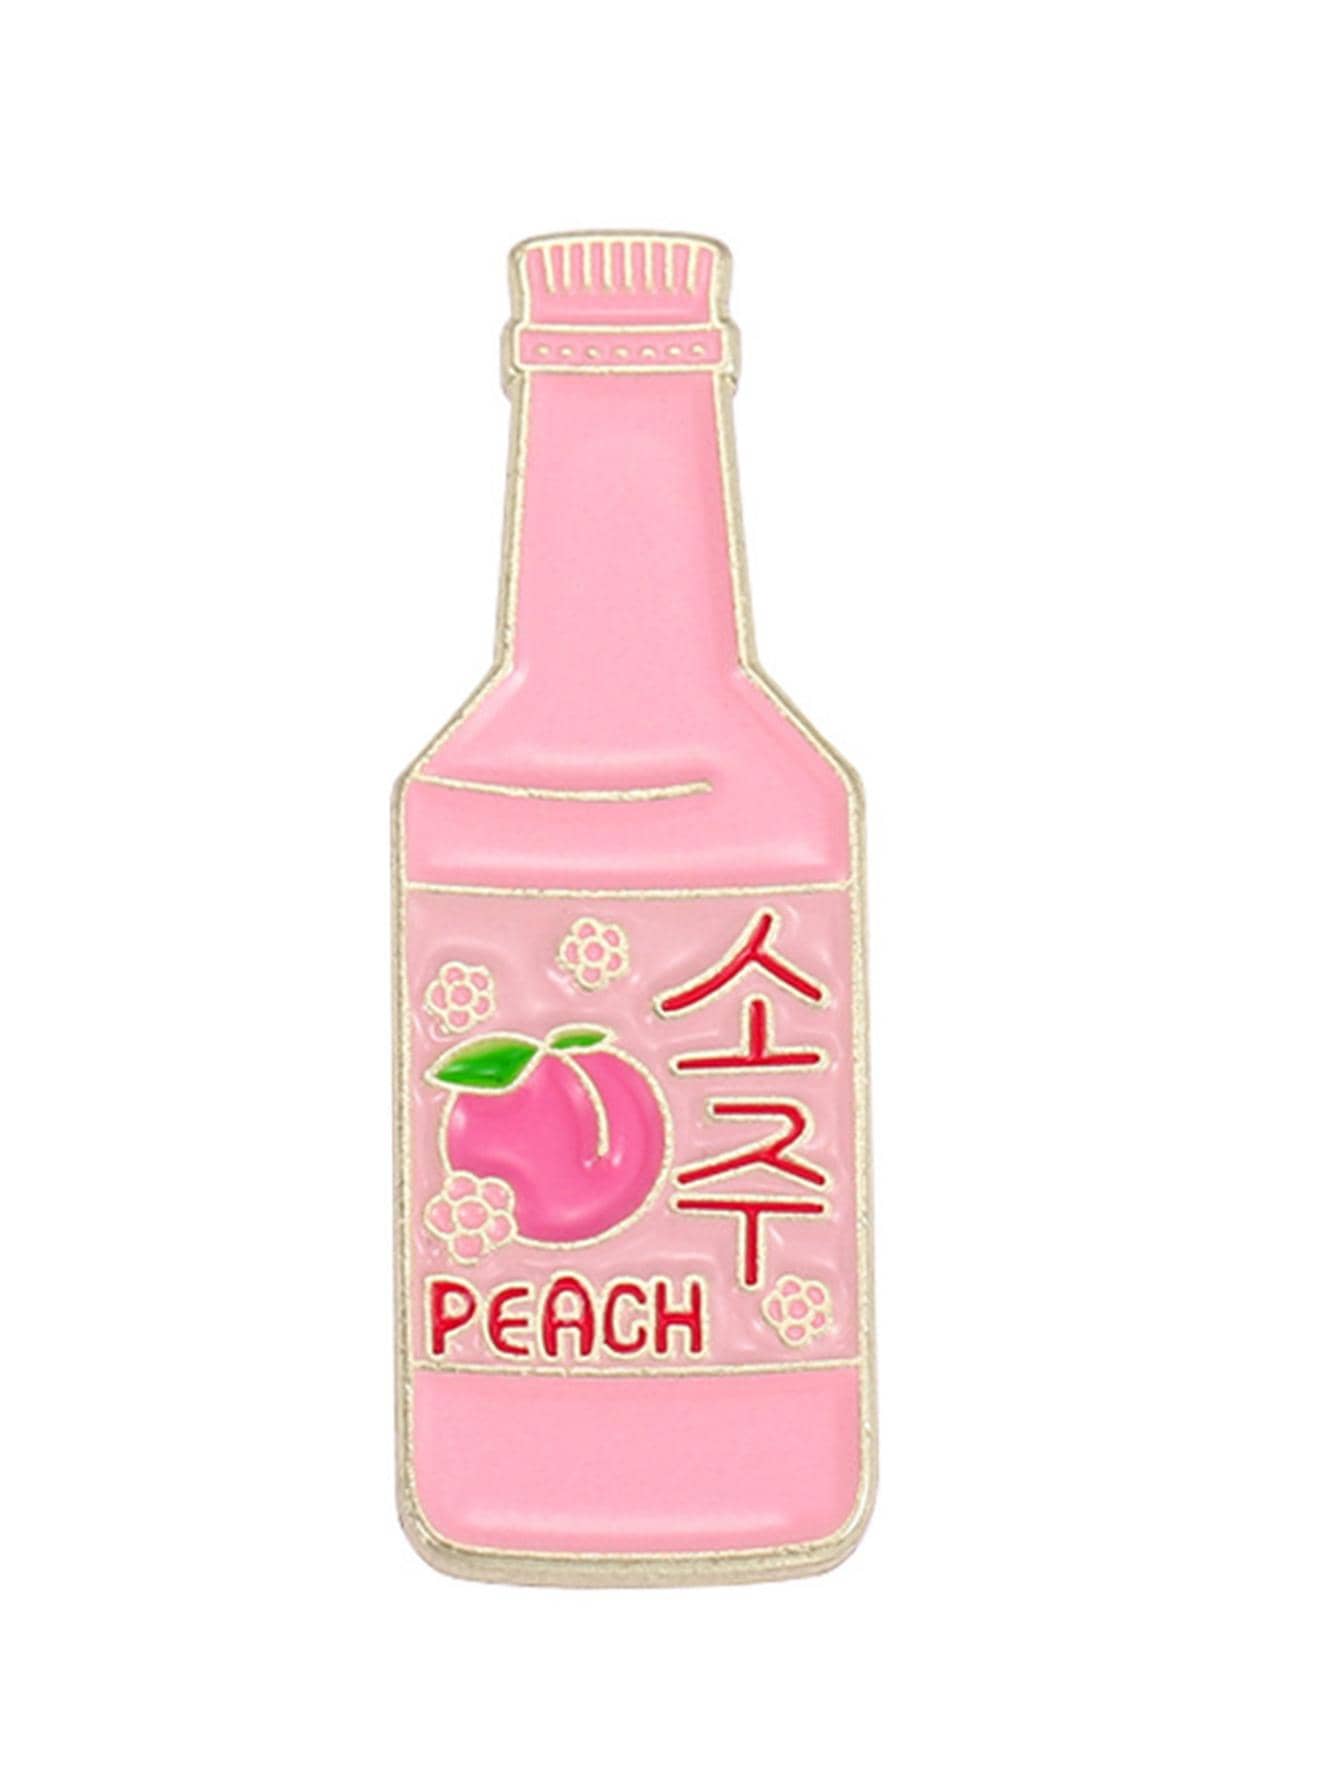 1pc Japanese & Korean Style Bottle Shaped Alloy Brooch Featuring Lovely Peach Design, Versatile Decoration